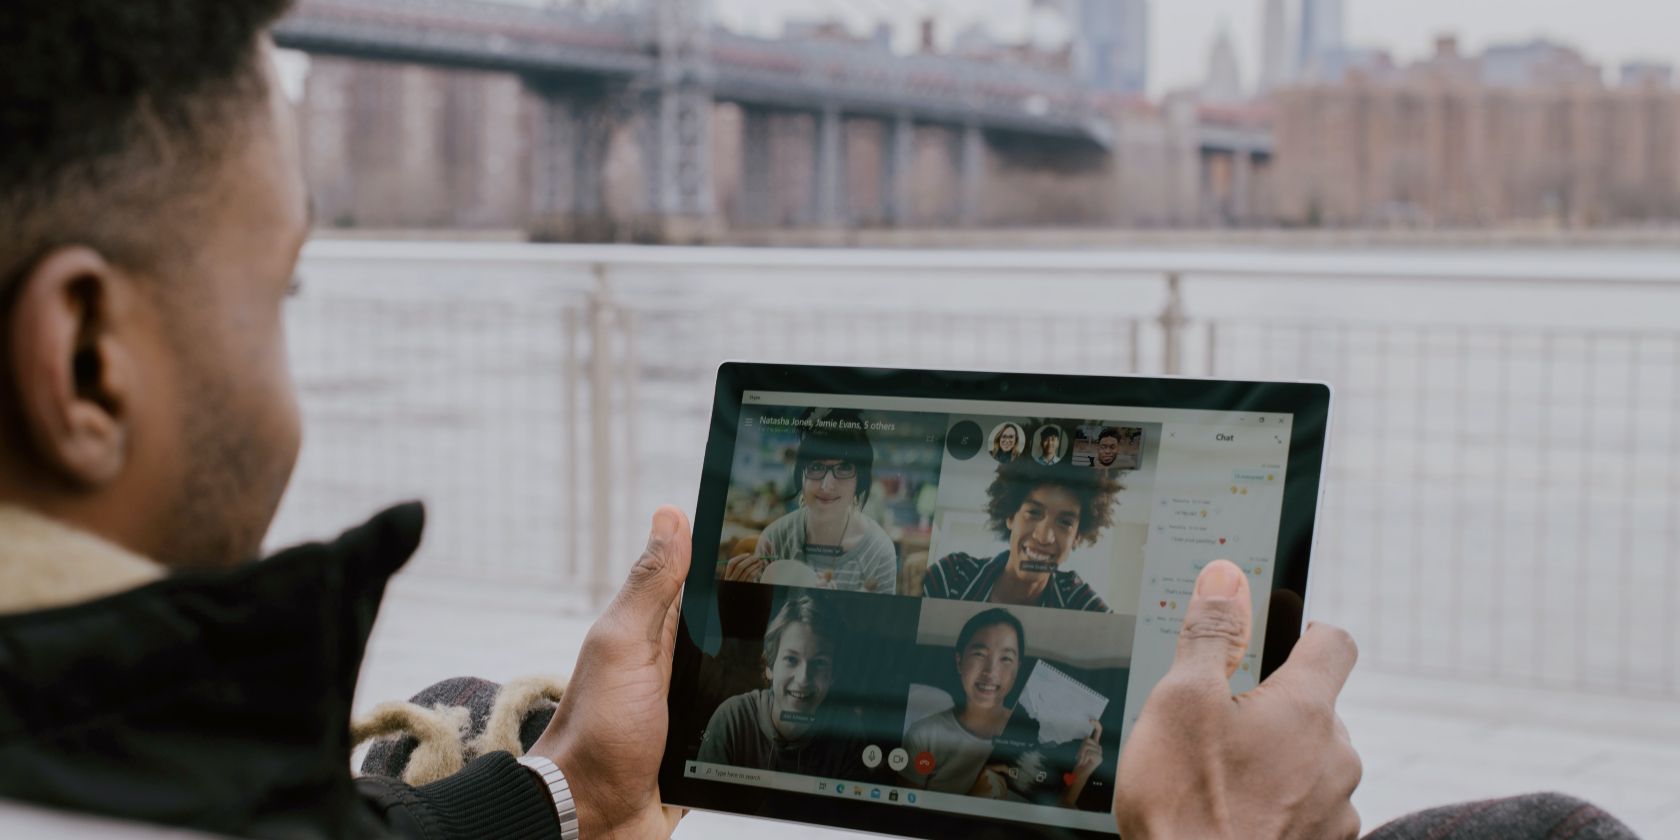 A man holding a Surface tablet and on a video call